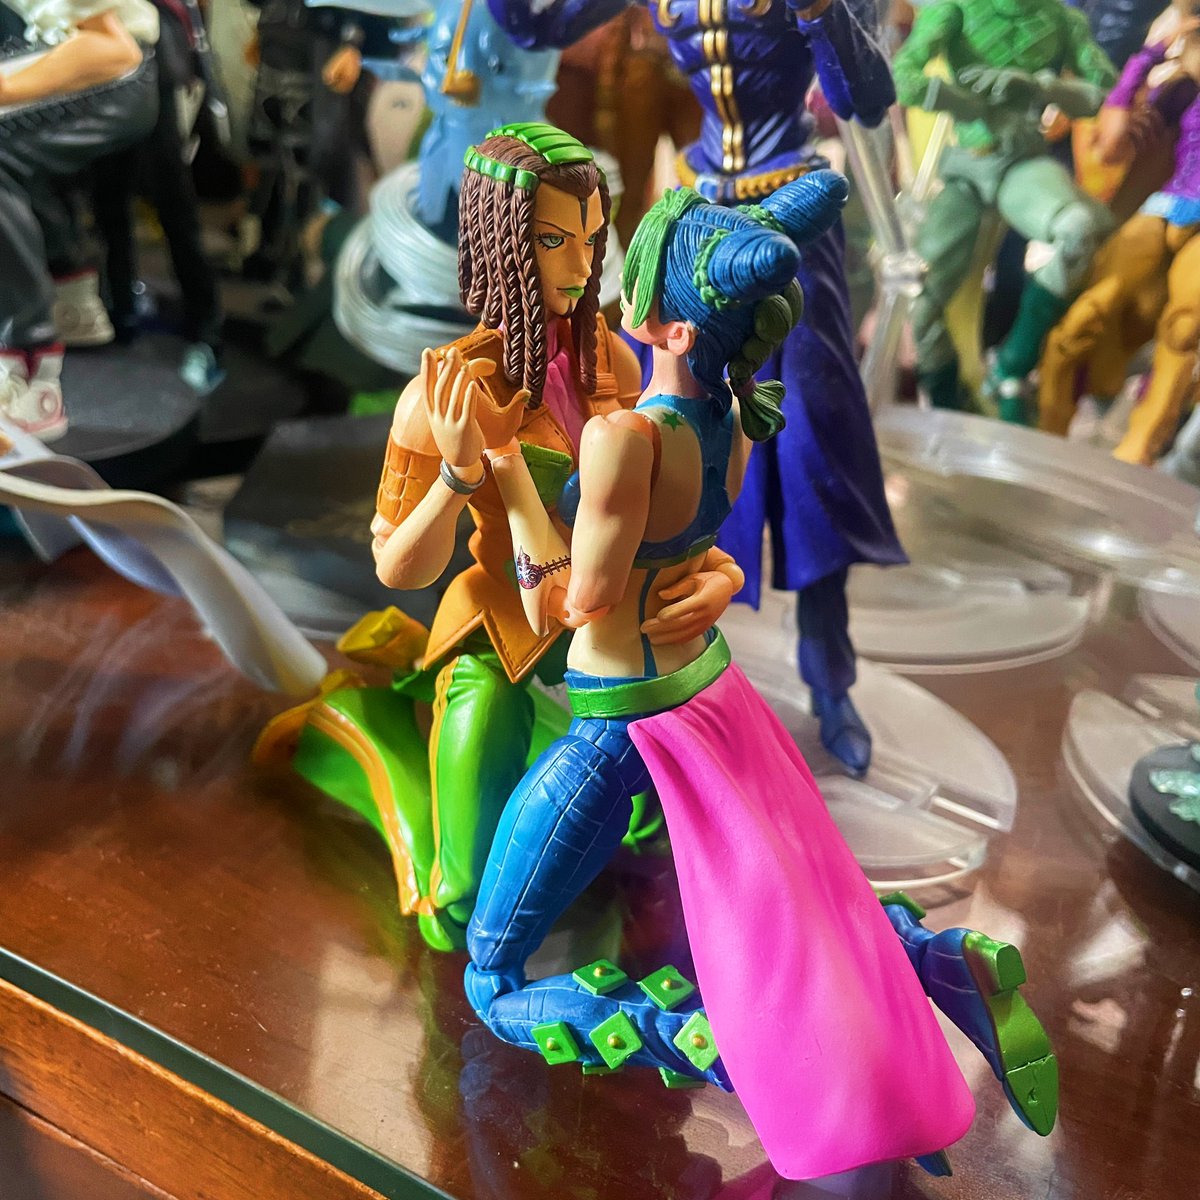 if not canon then why do these colorful plastics fit so naturally homosexually together? many such cases!